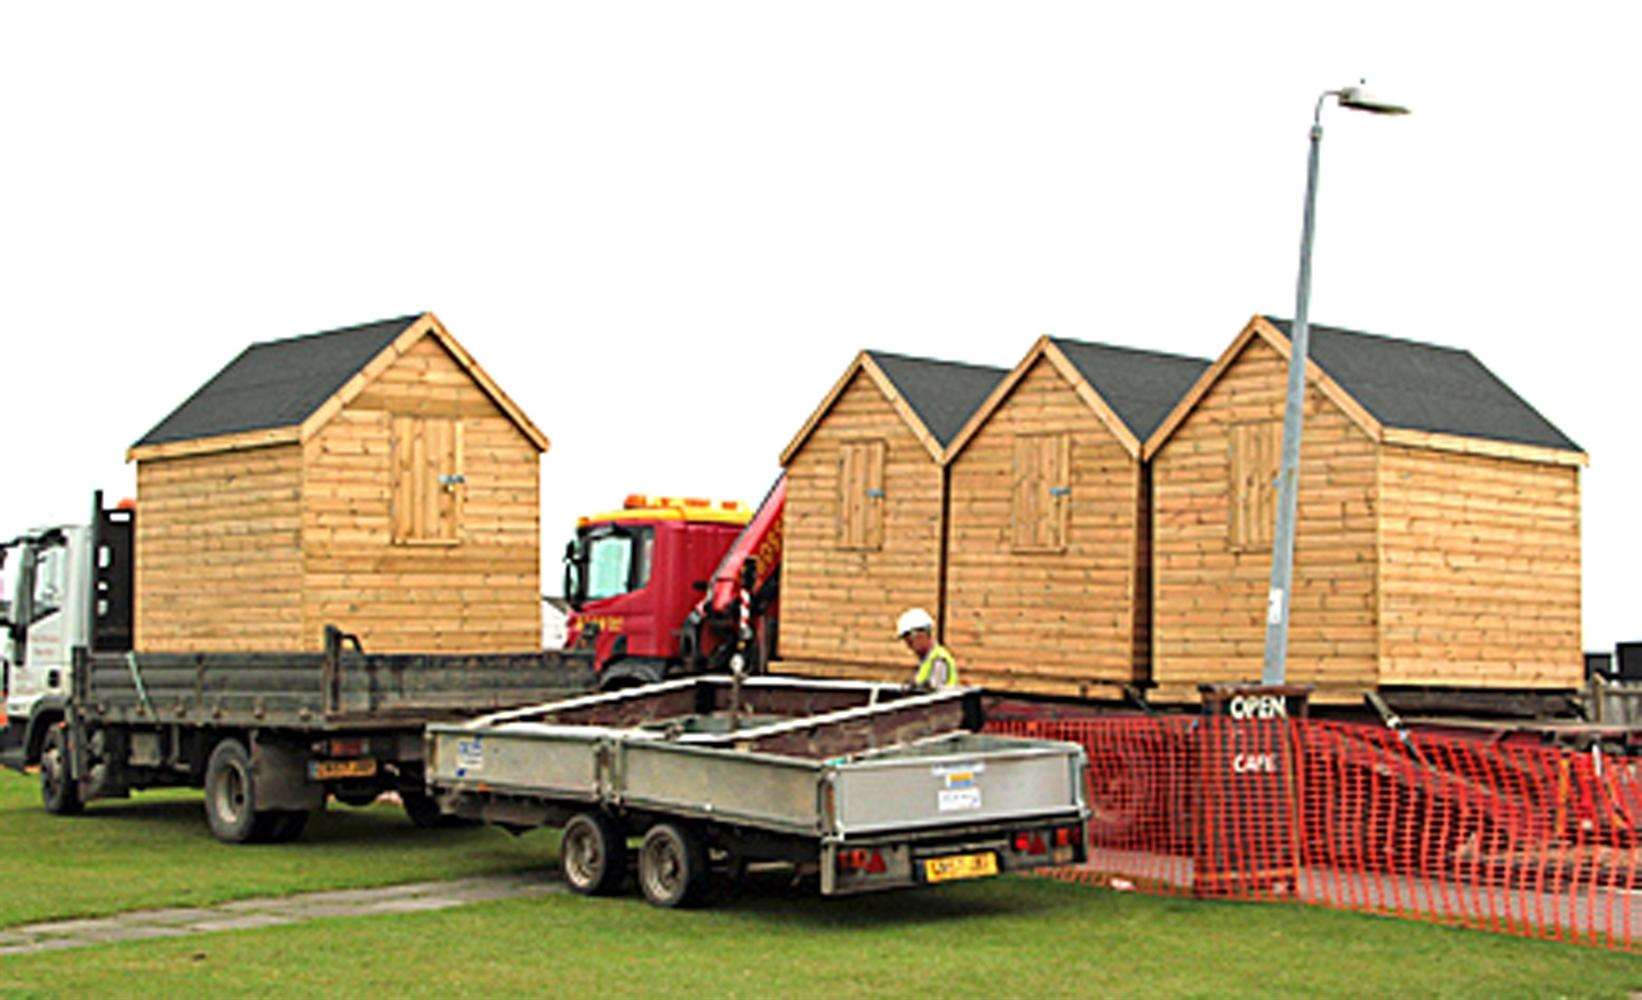 Nine of the twenty beach huts have been removed